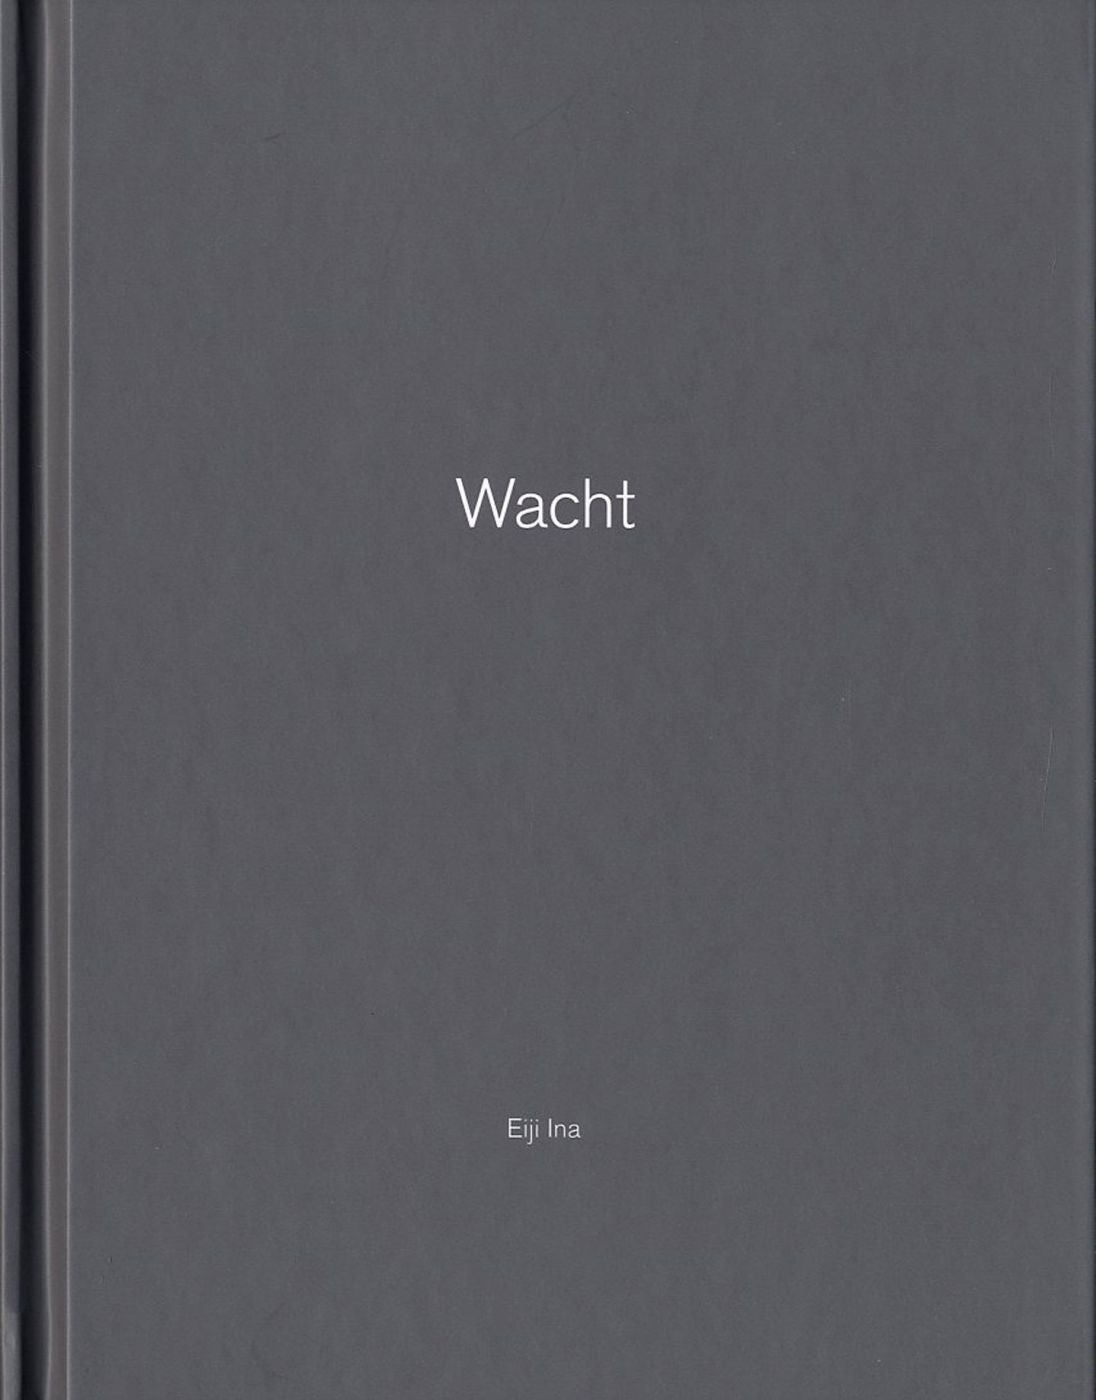 Eiji Ina: Wacht (One Picture Book #62), Limited Edition (with Print)